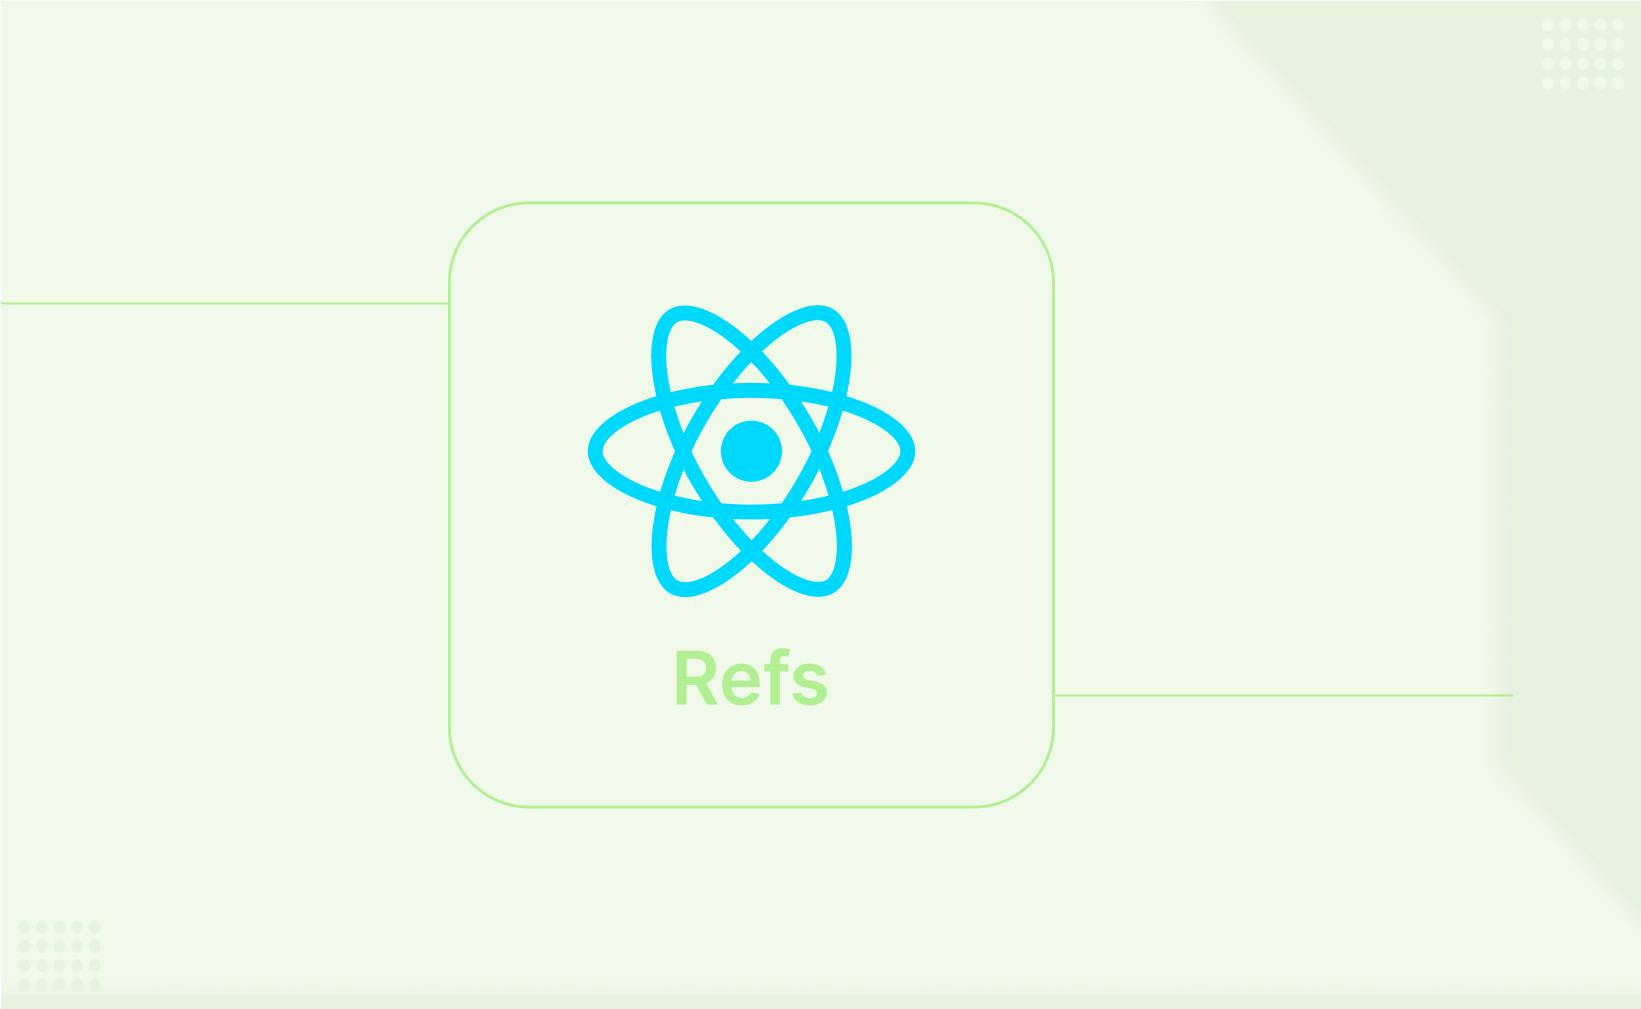 How to use React Refs in modern React applications